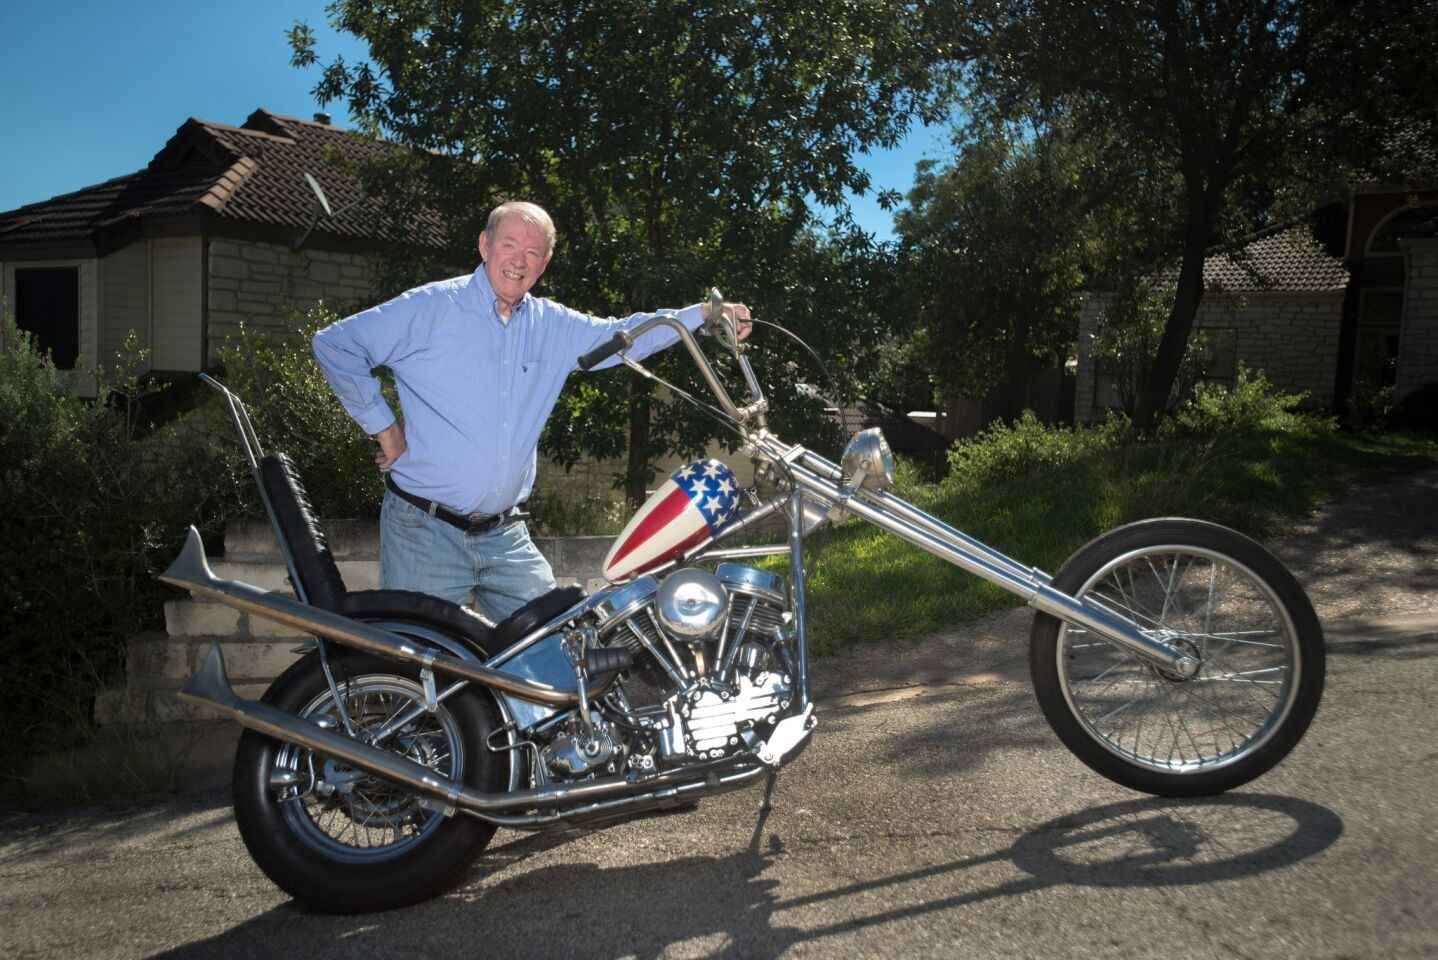 Gordon Granger of Texas says that his version of the Harley-Davidson "Captain America" chopper, which he bought for $63,500 in 1996, is the real deal -- not the one up for auction in Calabasas.